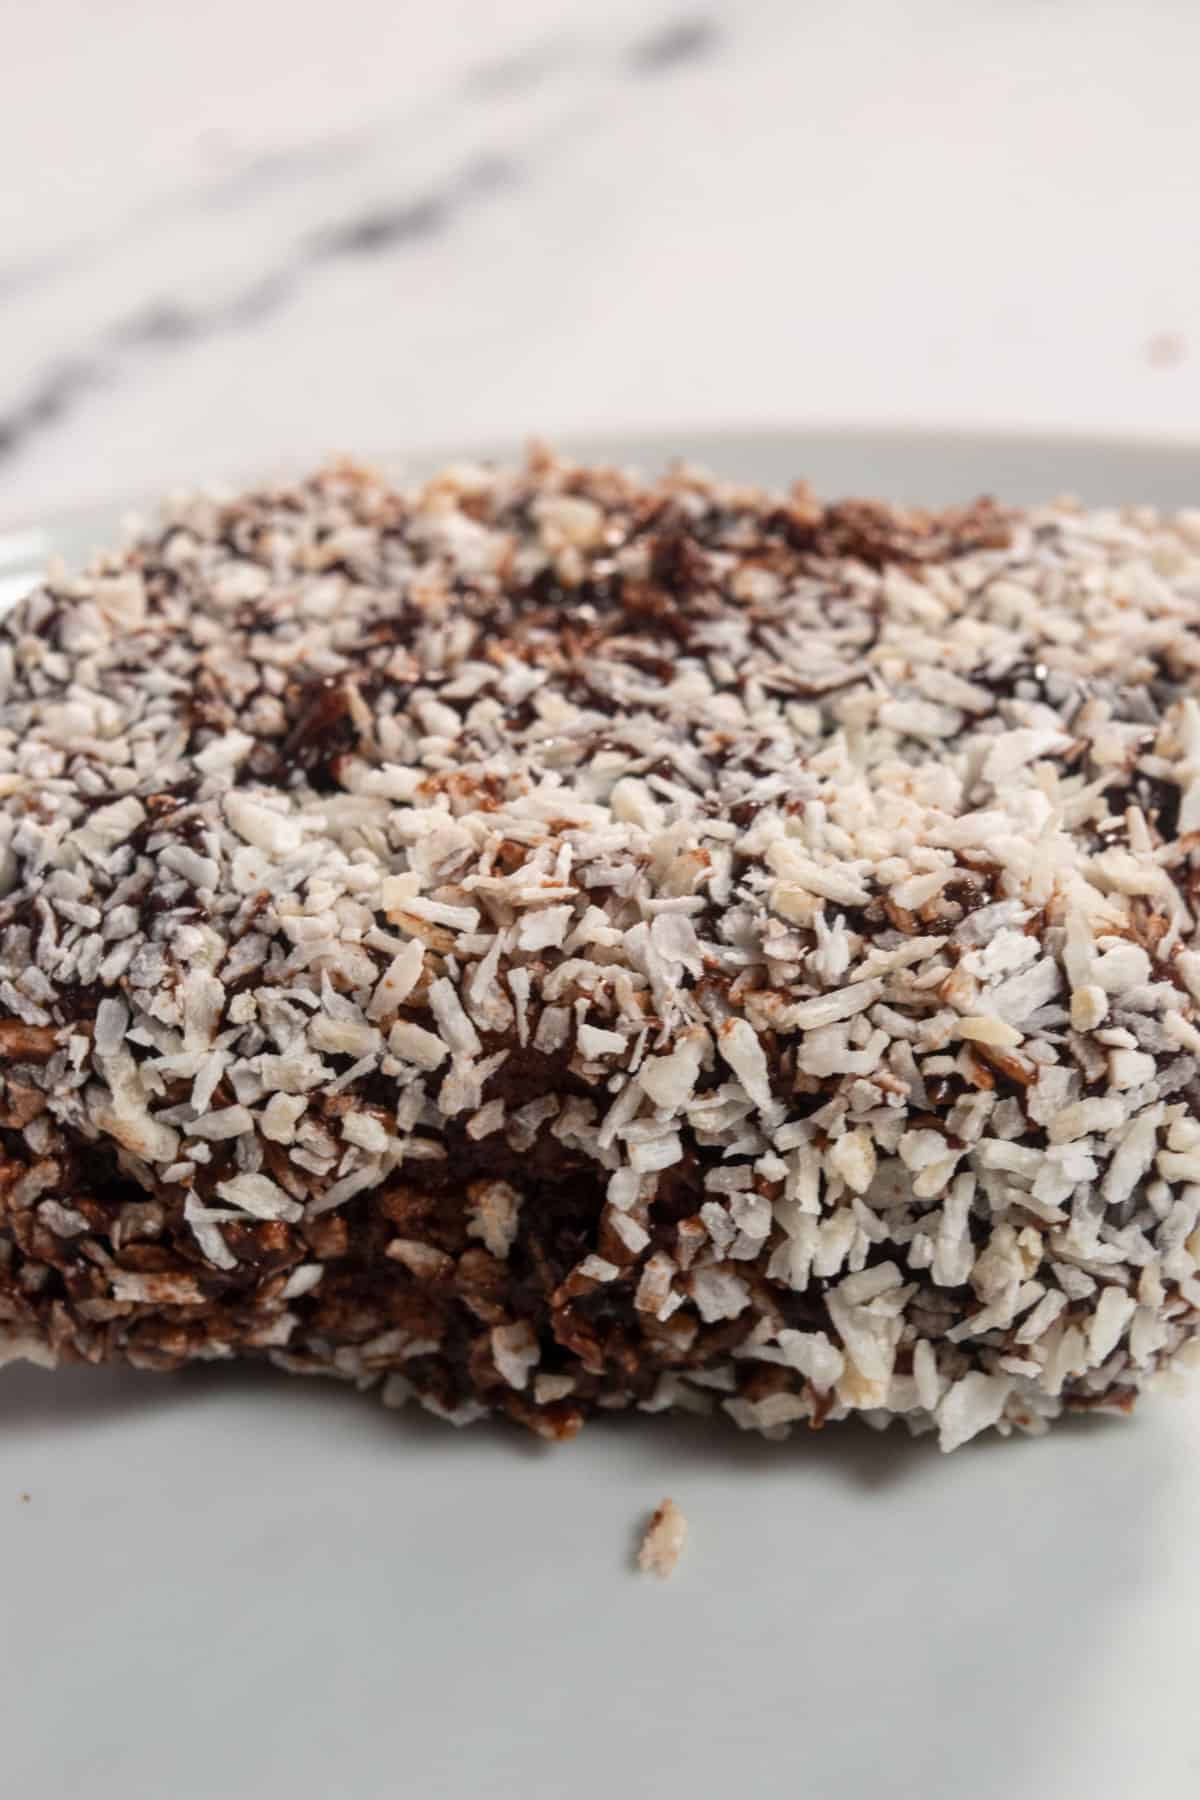 A whole lamington bar covered in lots of coconut and chocolate.